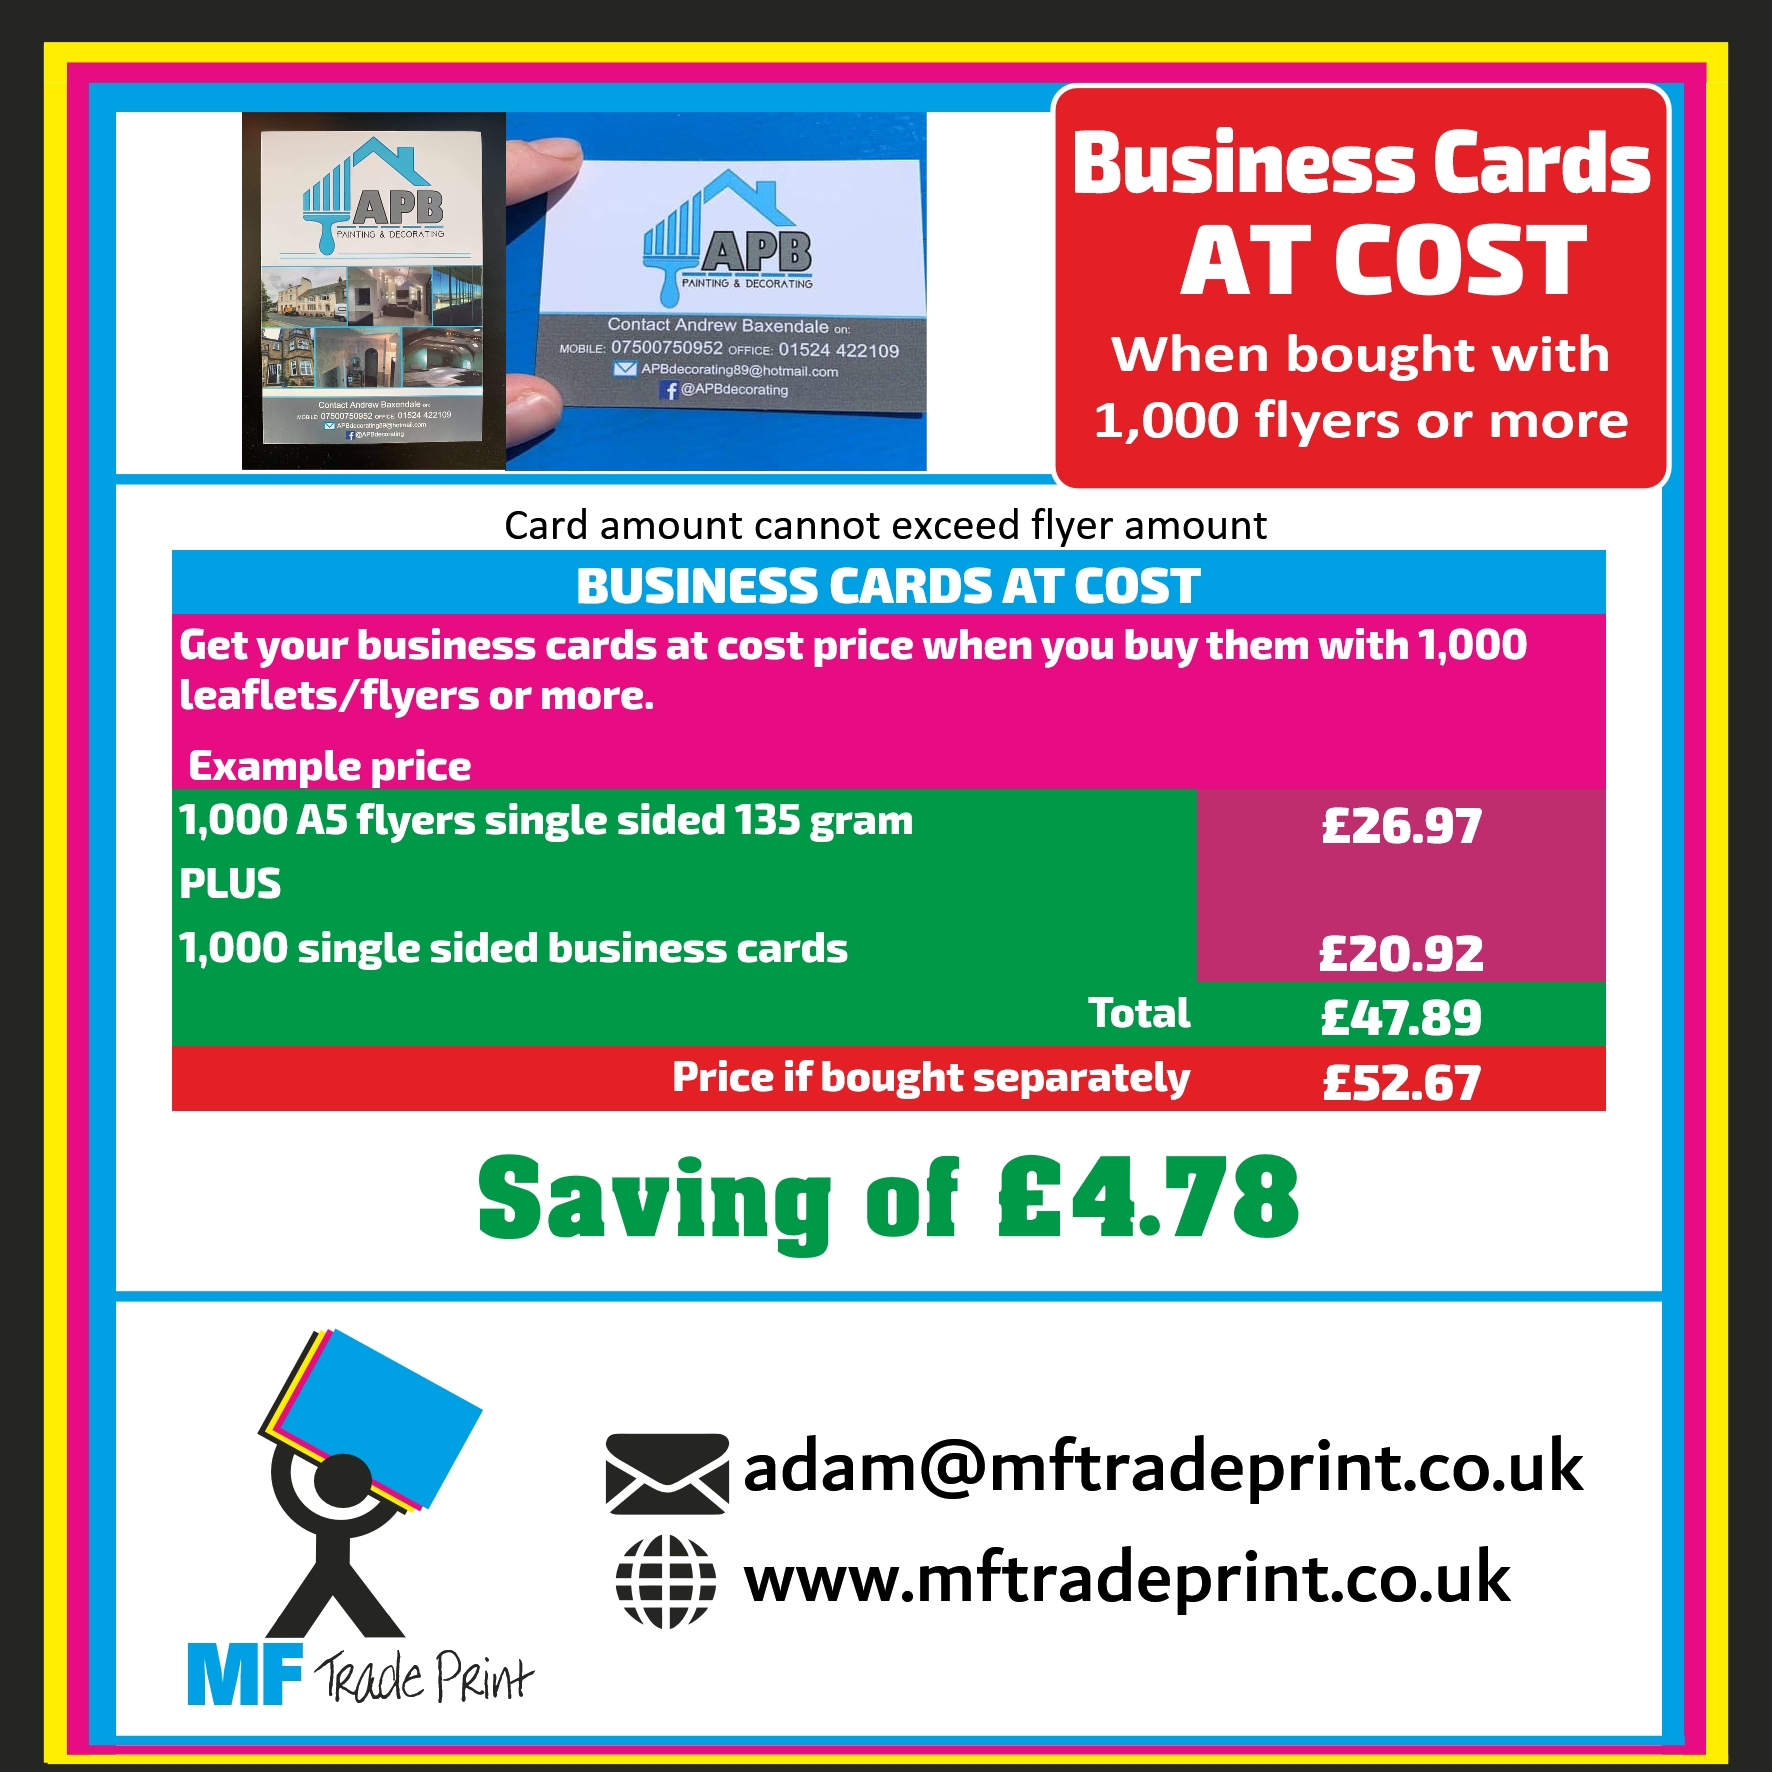 Business cards at cost price if bought with flyers leaflets